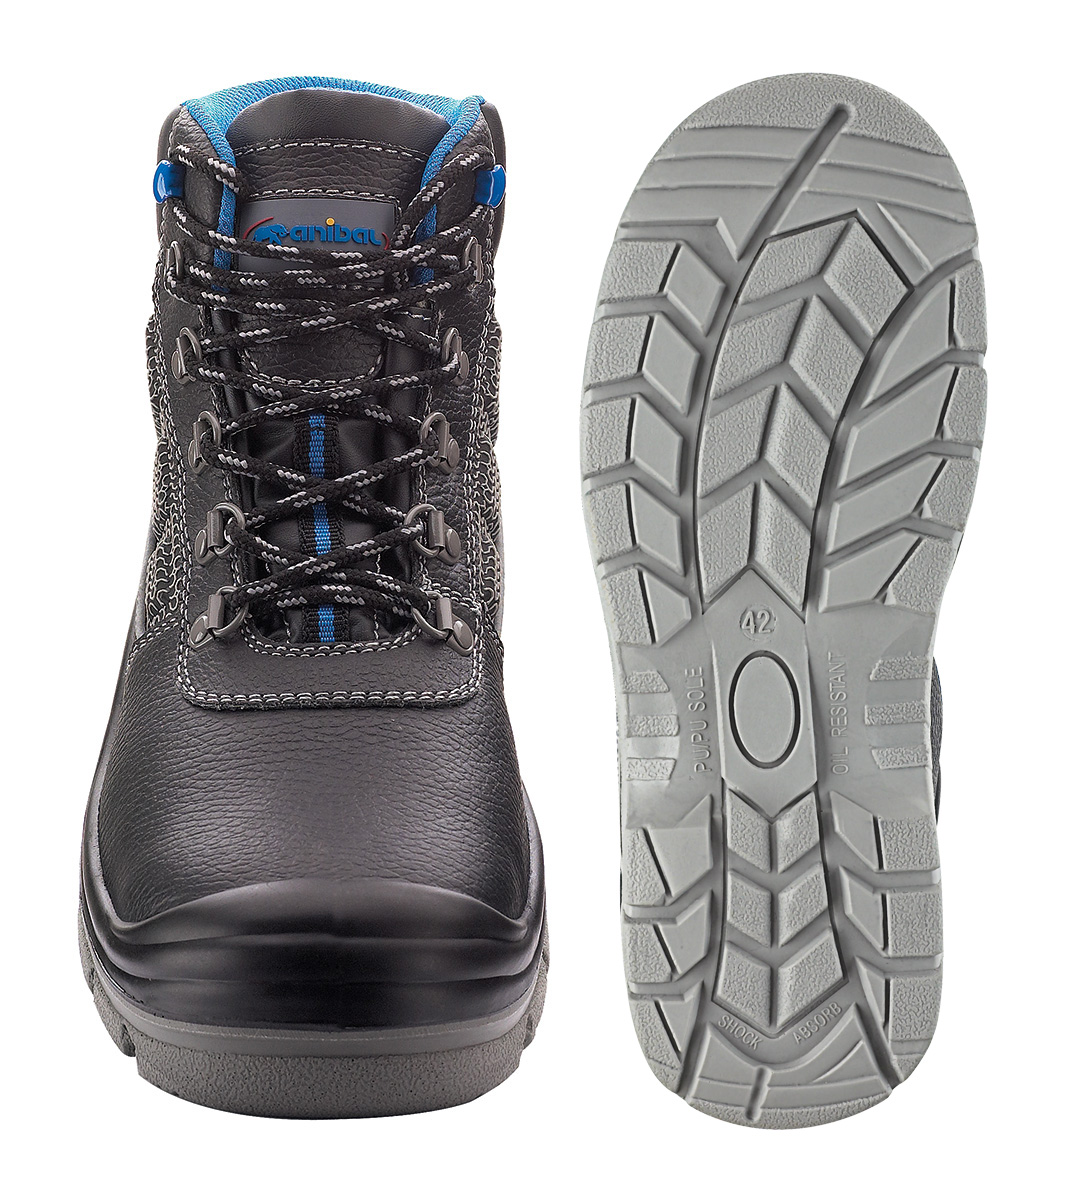 1688-BRS3 Safety Footwear Metal Mod. 'NUMANCIA'. Black leather boot S3 with dual density polyurethane sole.